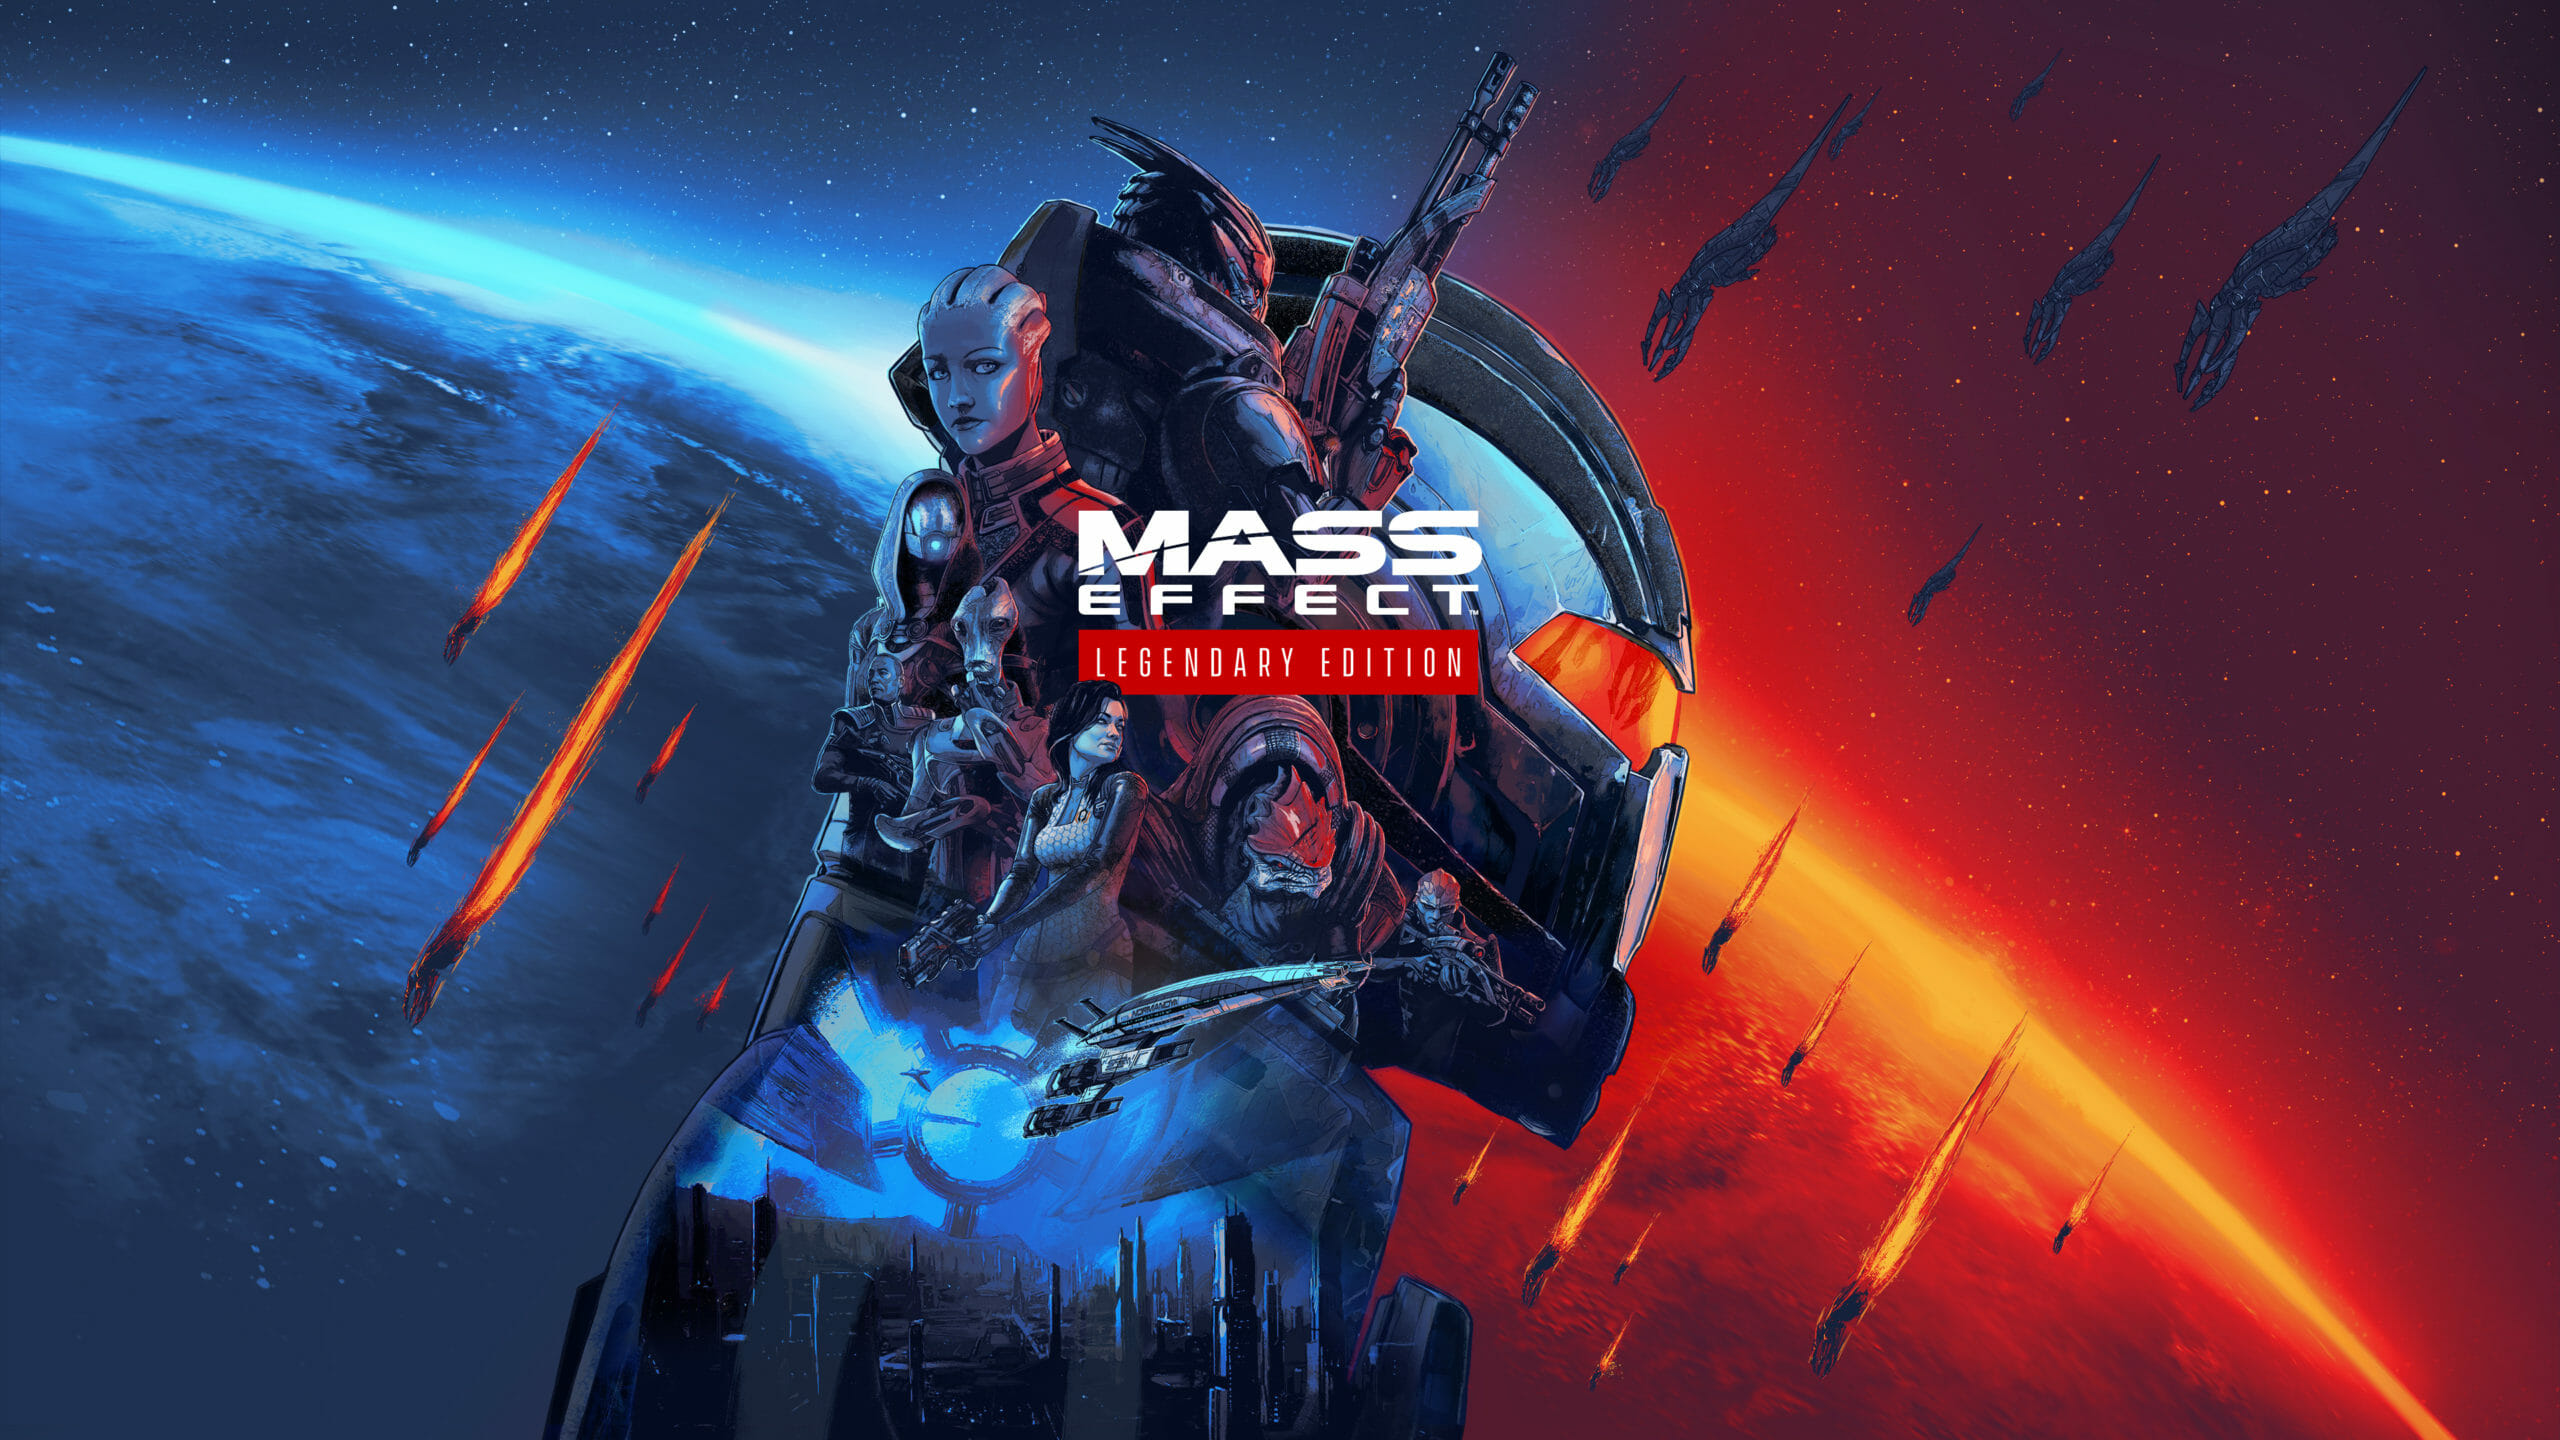 Relive The Award Winning Space Opera In Mass Effect Legendary Edition On May 14 EA #MassEffect #GamingNews. RCR News Media